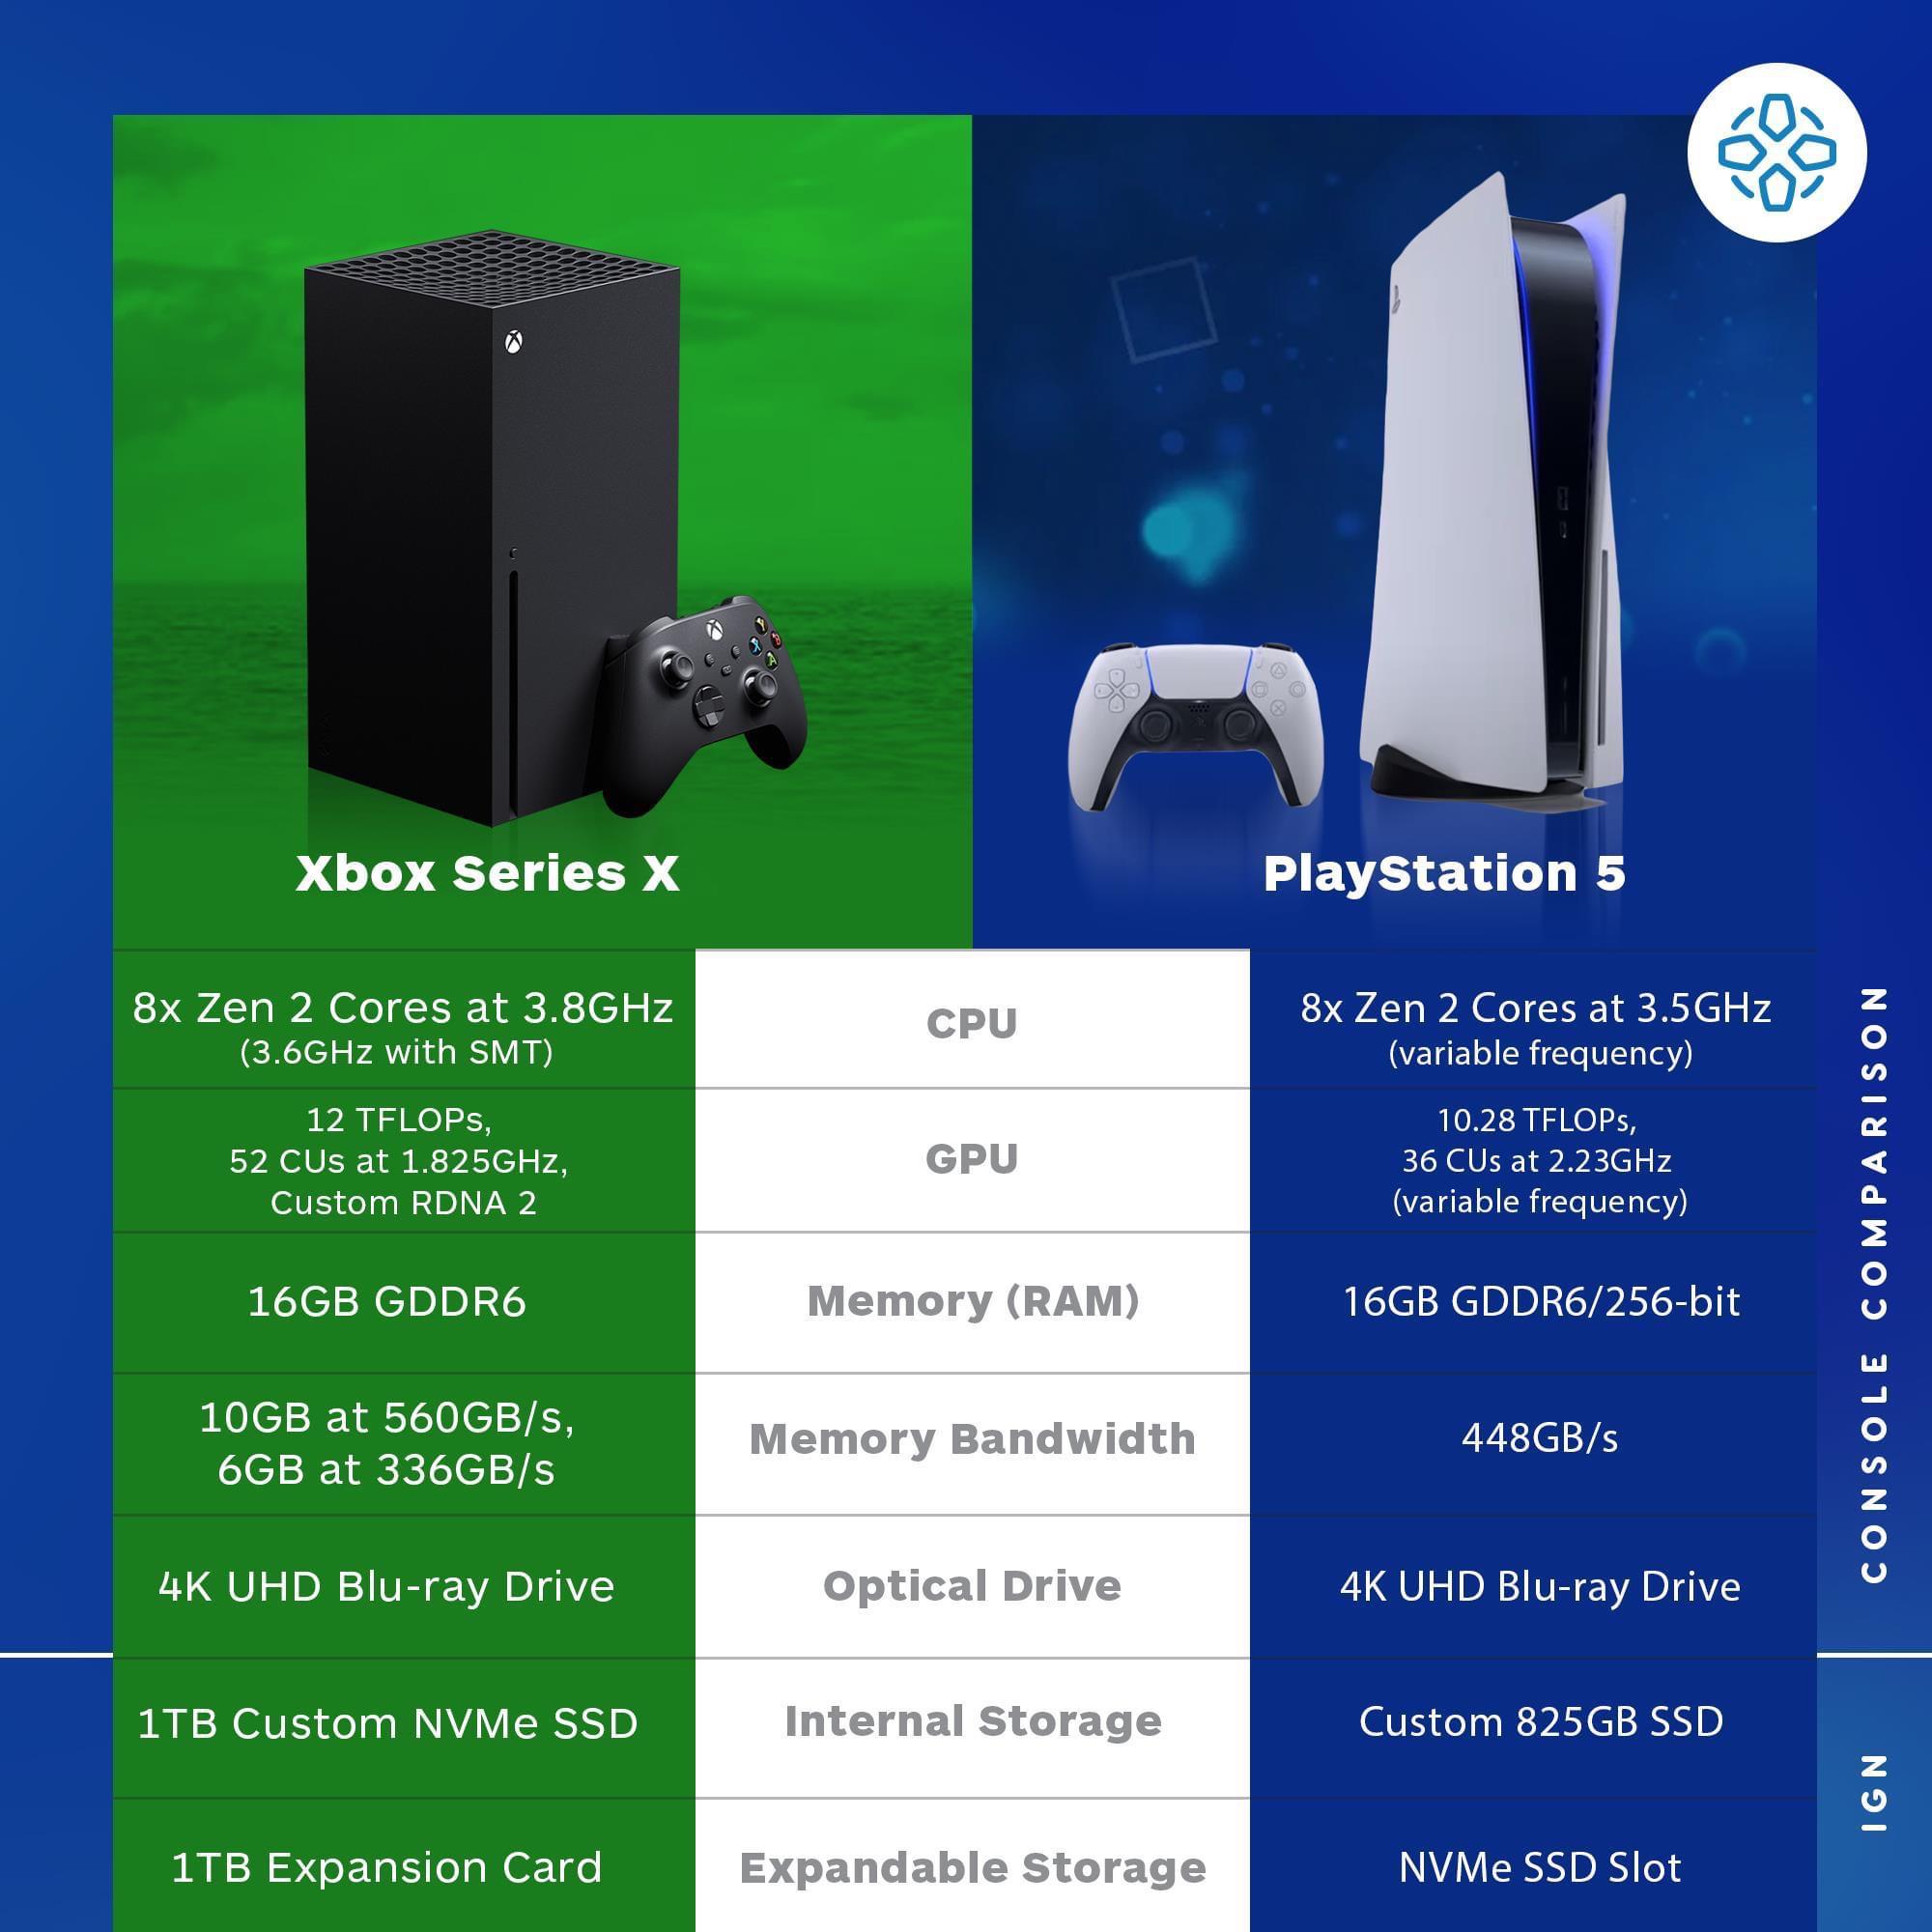 Xbox Series X vs. PS5: How to pick the console for you